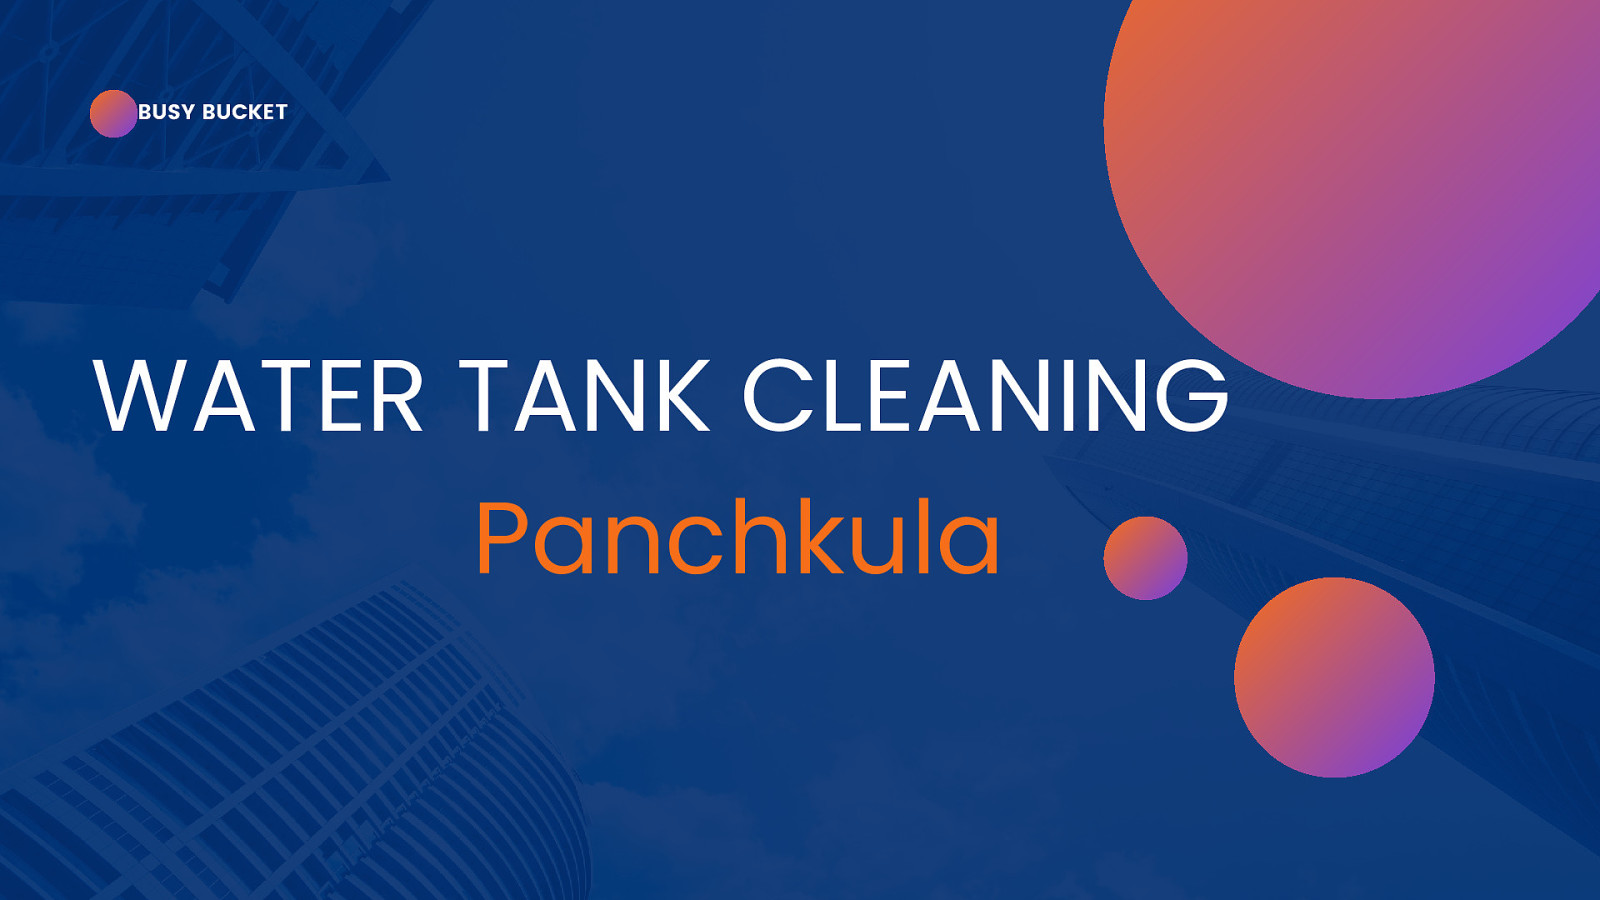 Water tank cleaning services in Panchkula